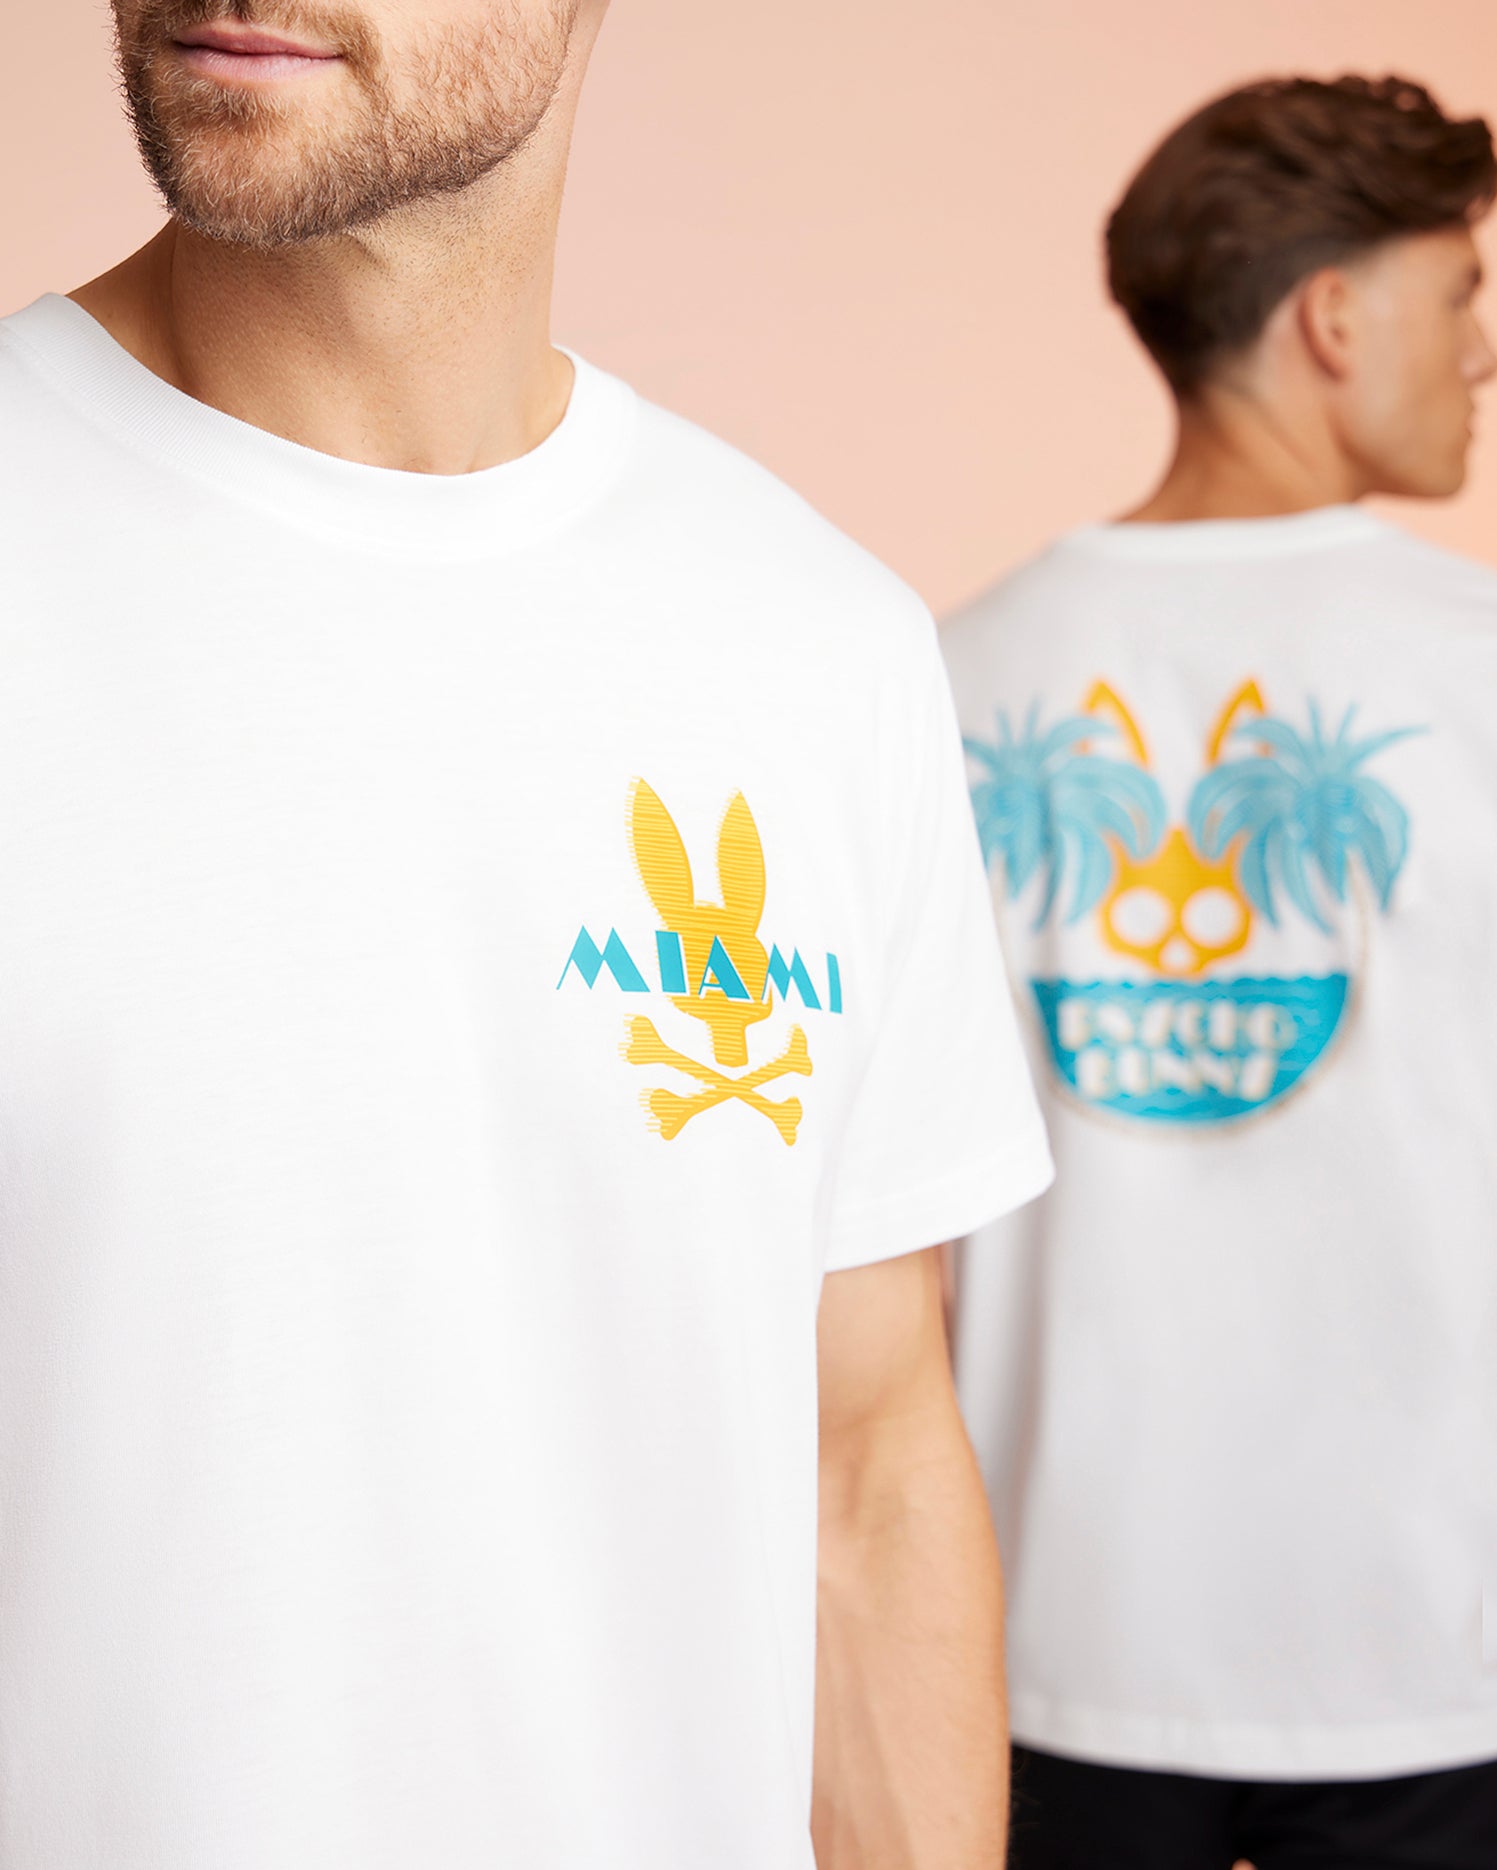 Two men wearing white men's Florida tees with colorful graphics. The man in the foreground has a Psycho Bunny MENS MIAMI TEE - B6U550W1PC that says 